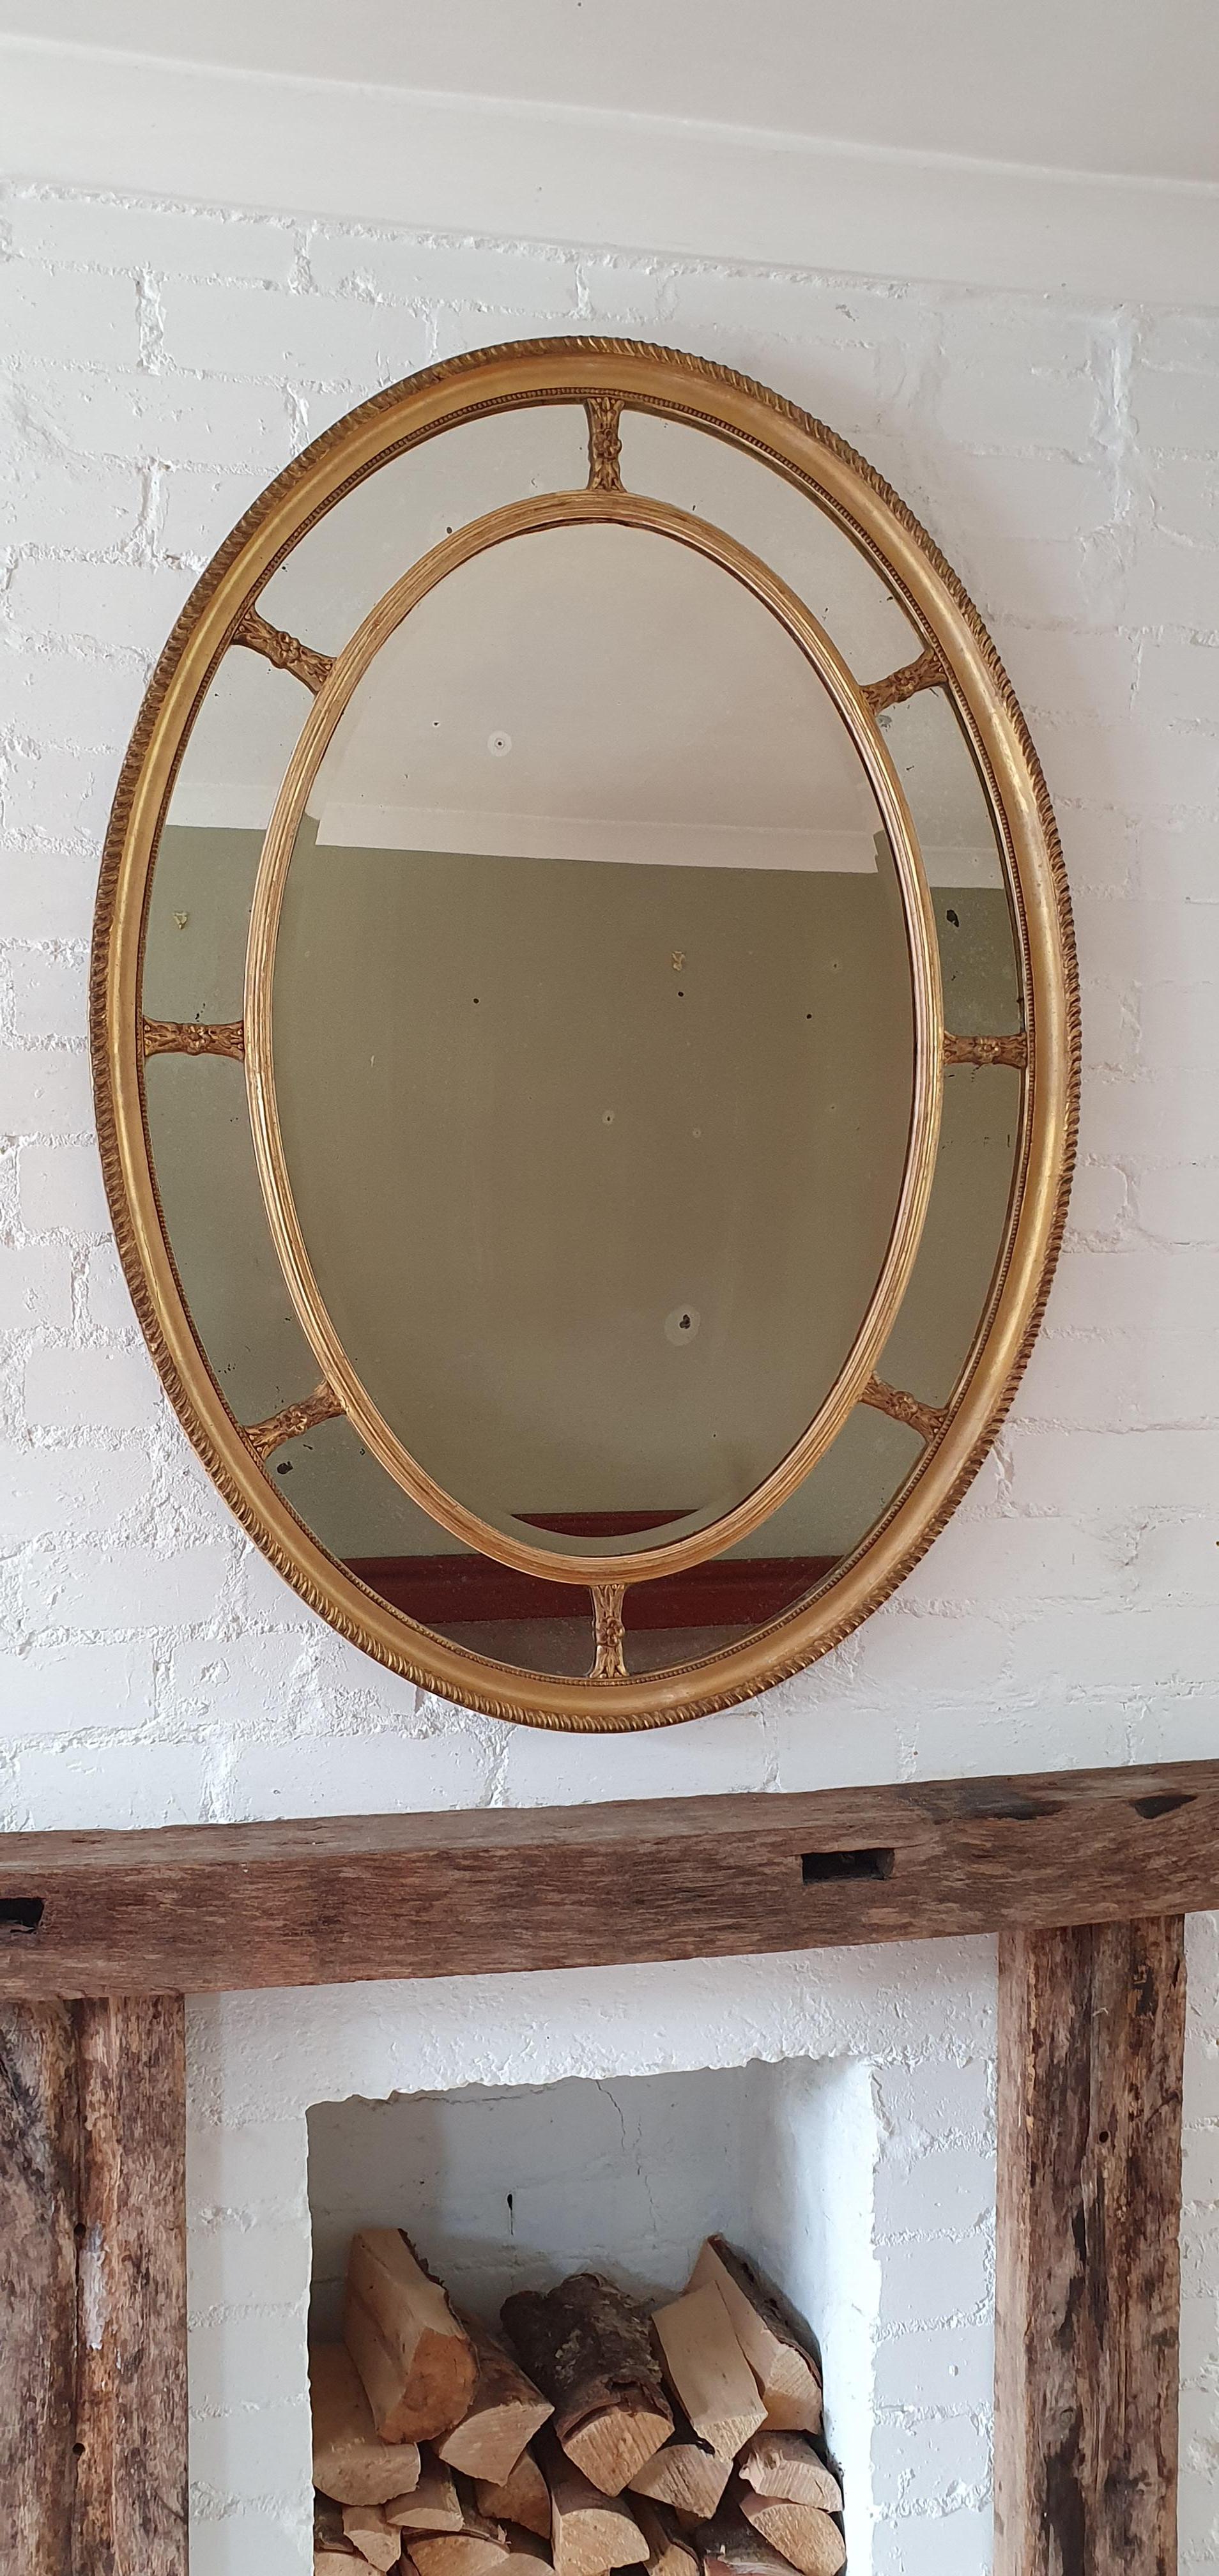 English giltwood and composition marginal wall mirror, Adam style circa 1890. Original gilding. Original mirror plate (center beveled), with signs of age ( black spots, scratches etc.